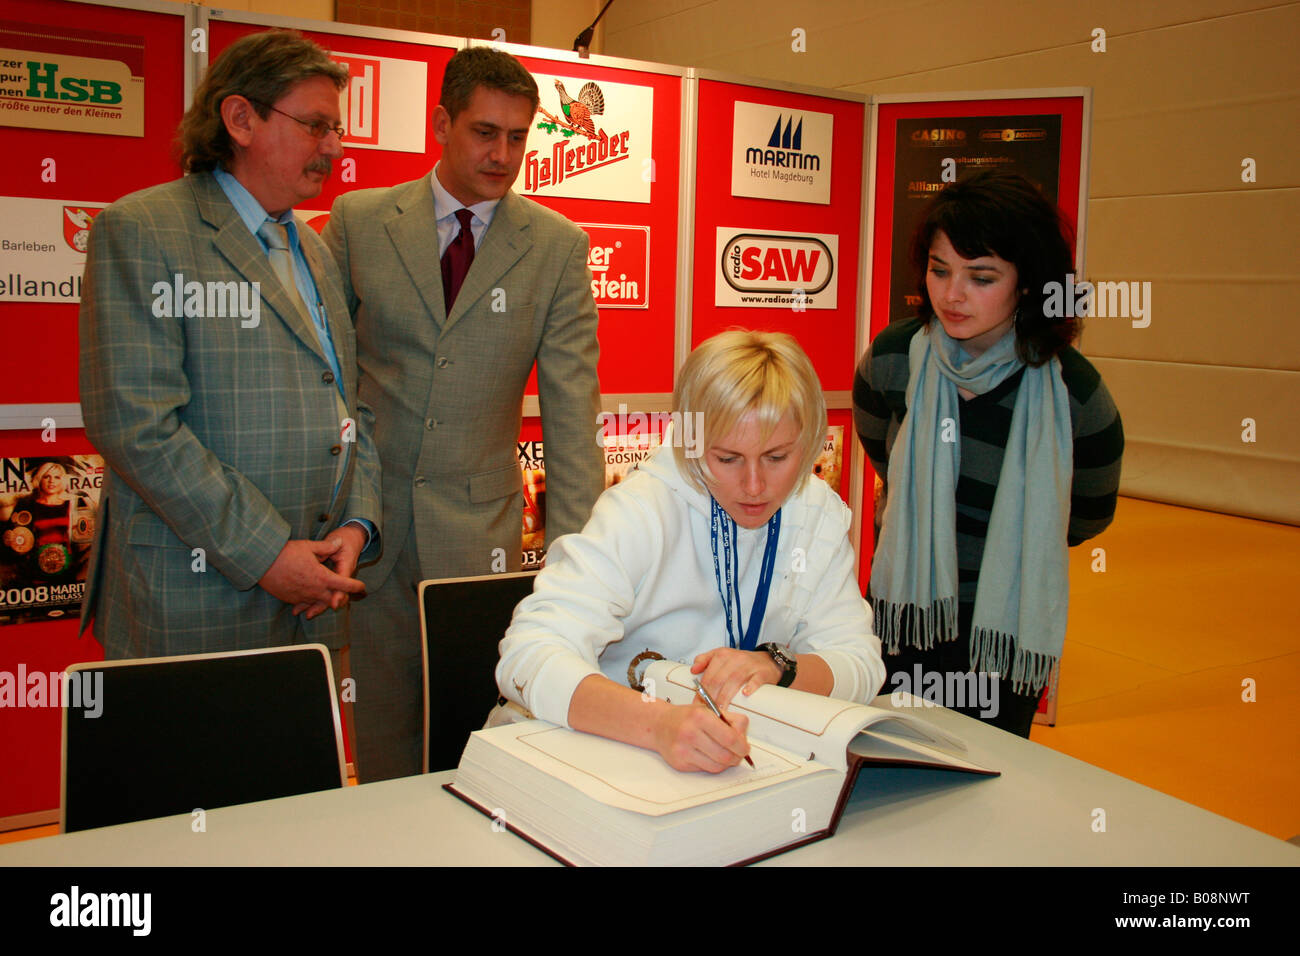 Natascha Ragosina, seven-time world champion boxer, registering in the Golden Book of the town of Barleben after her official w Stock Photo